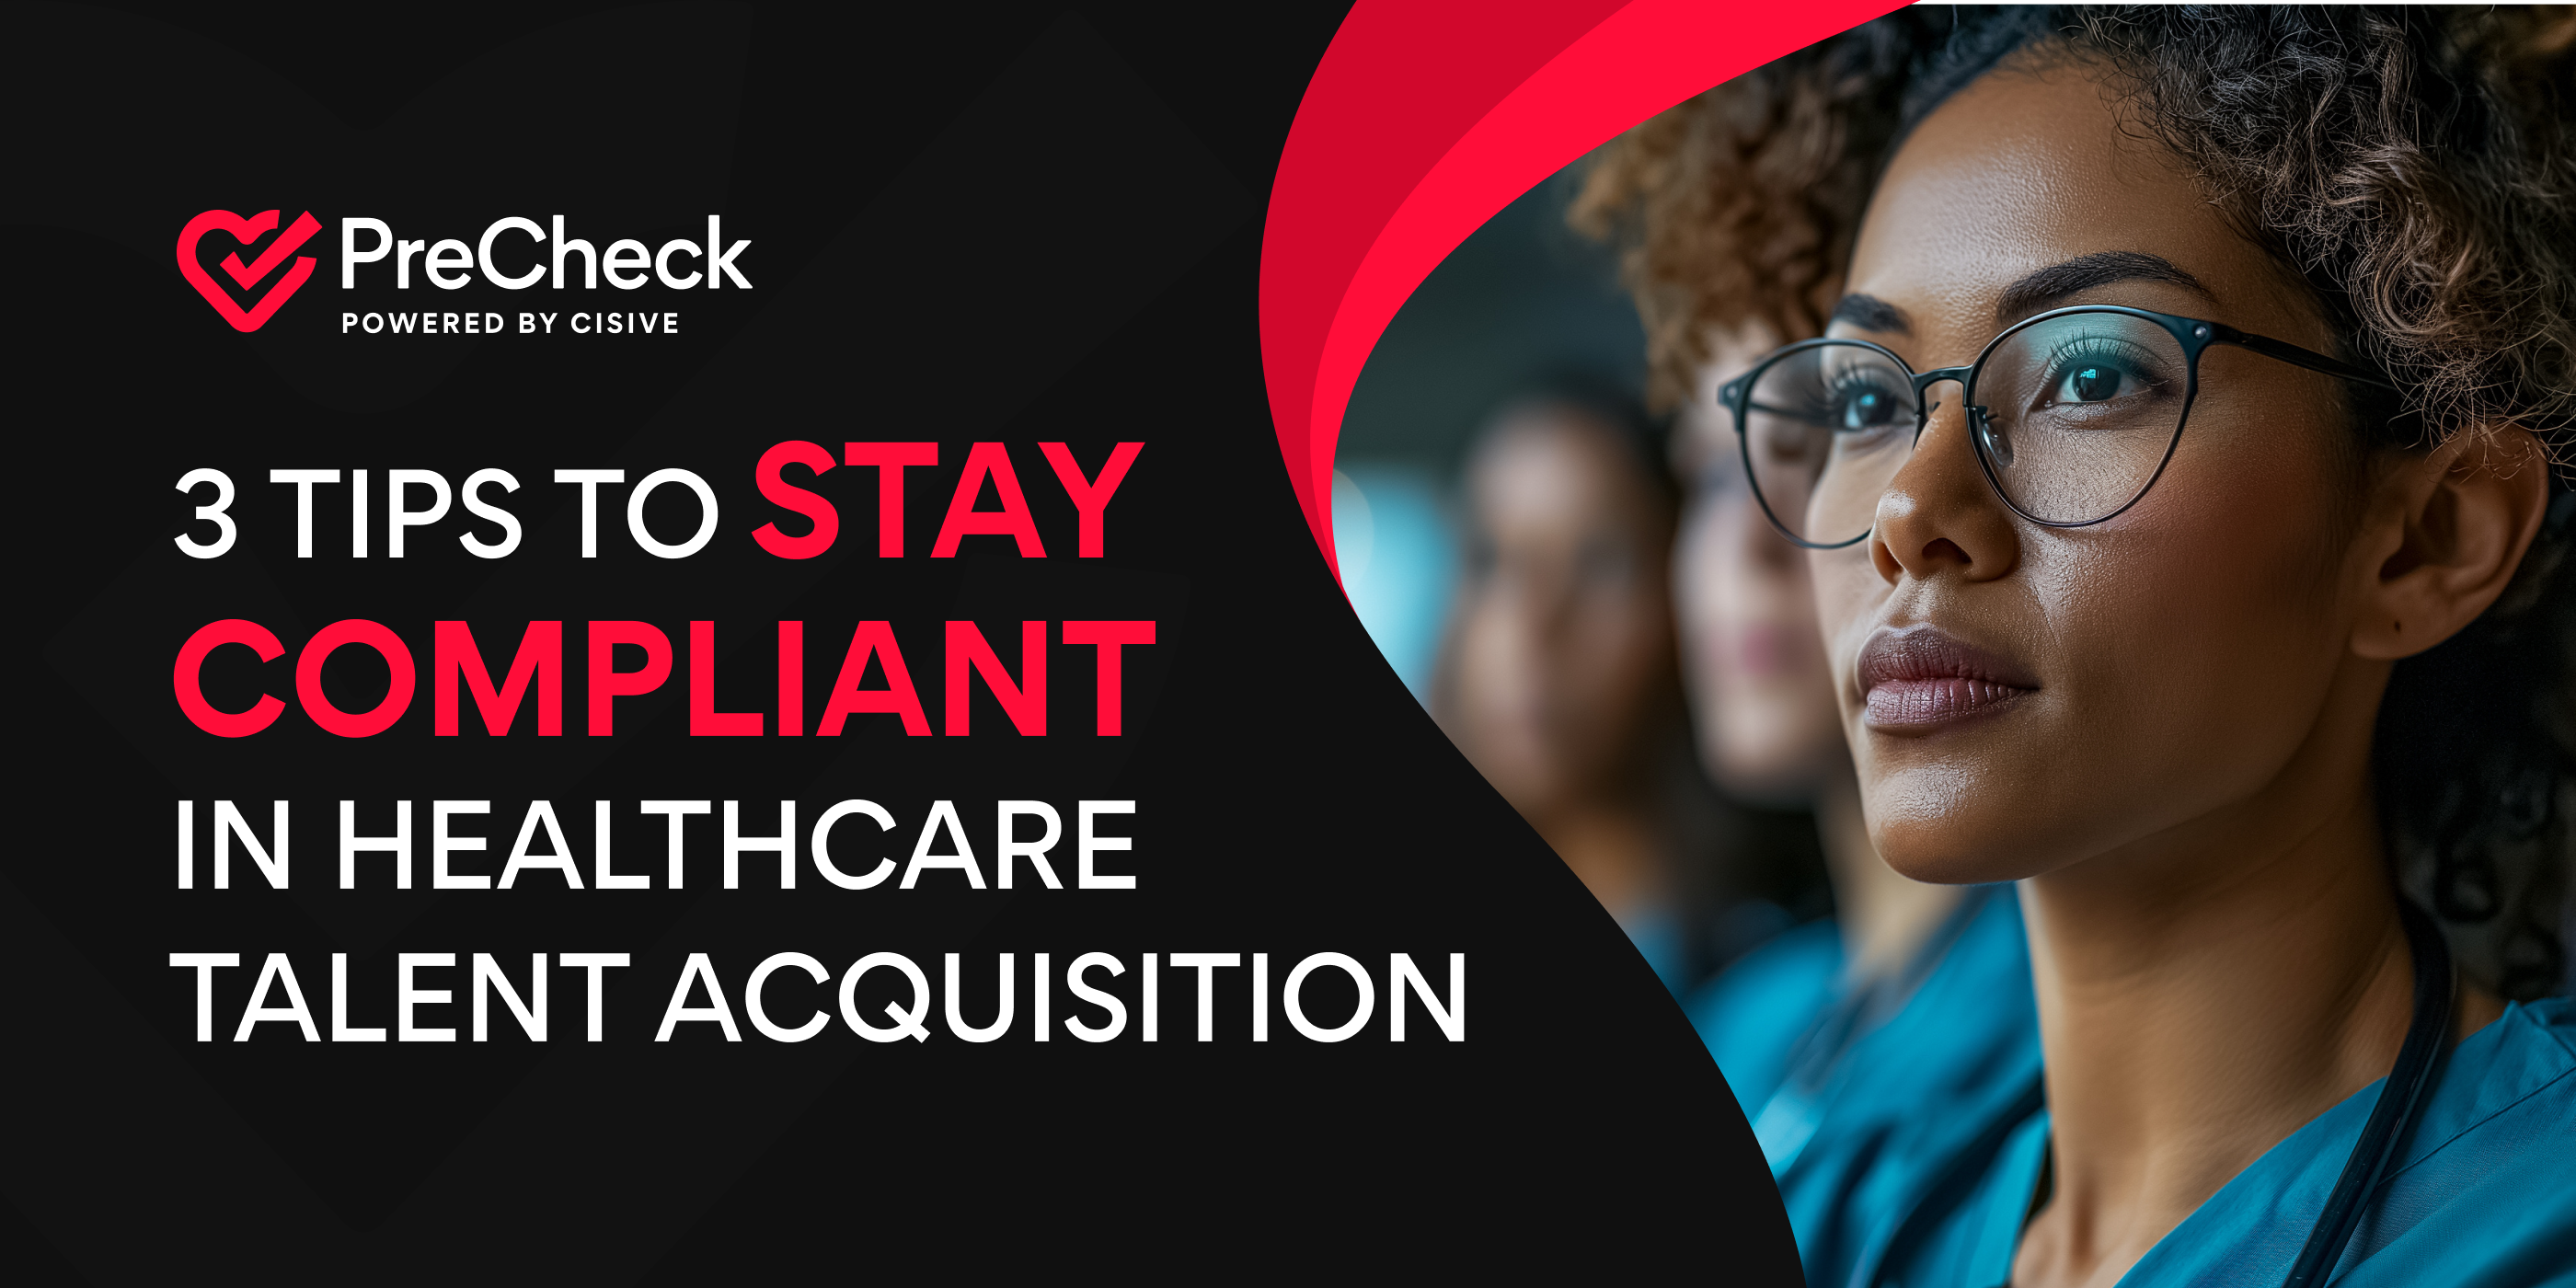 PreCheck, Powered by Cisive. 3 Tips to Stay Compliant in Healthcare Talent Acquisition